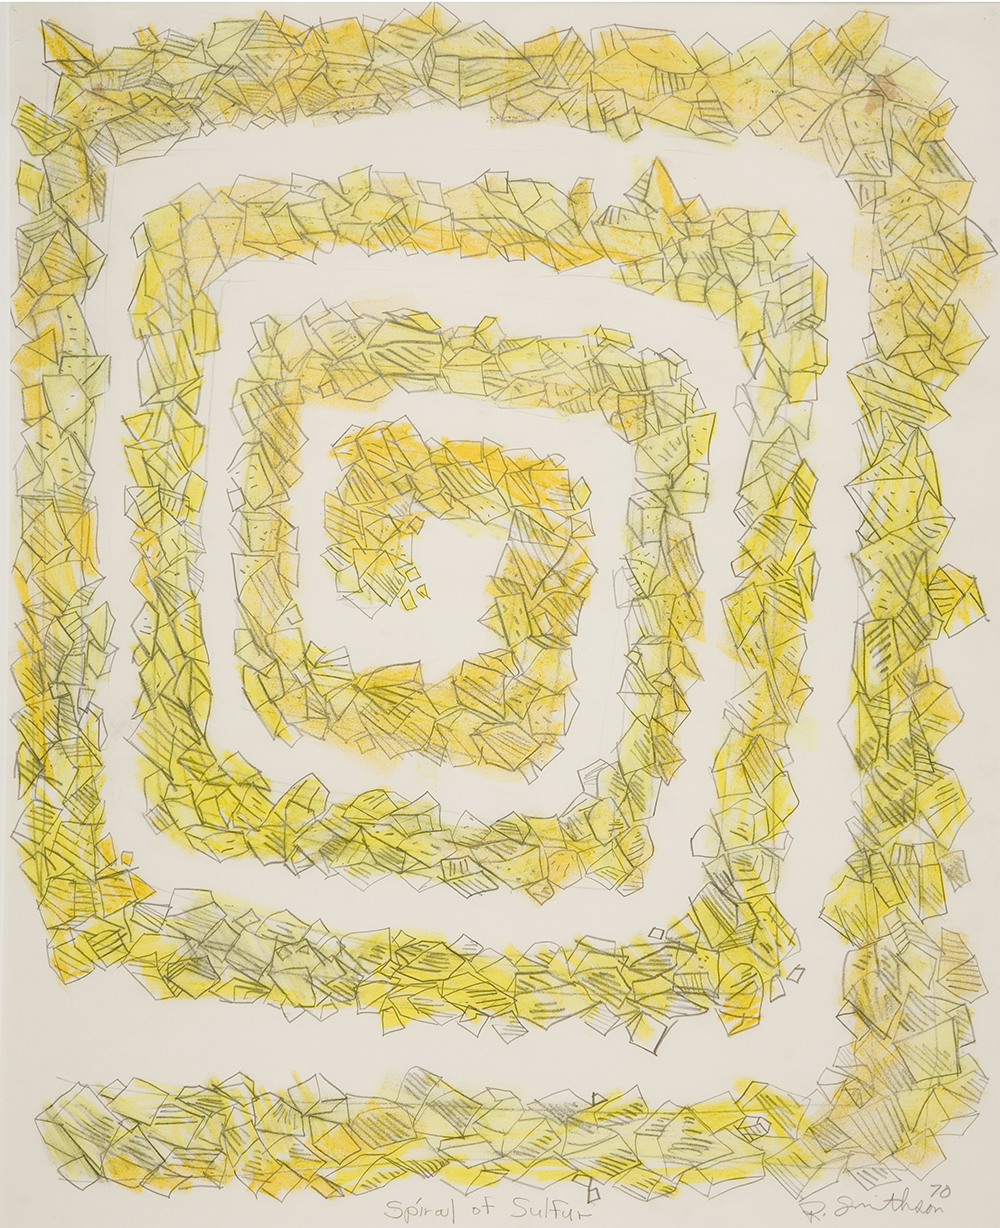 a drawing of a yellow spiral of rocks from a birds-eye view. The spiral takes up the entire page and is squared off at the corners. 